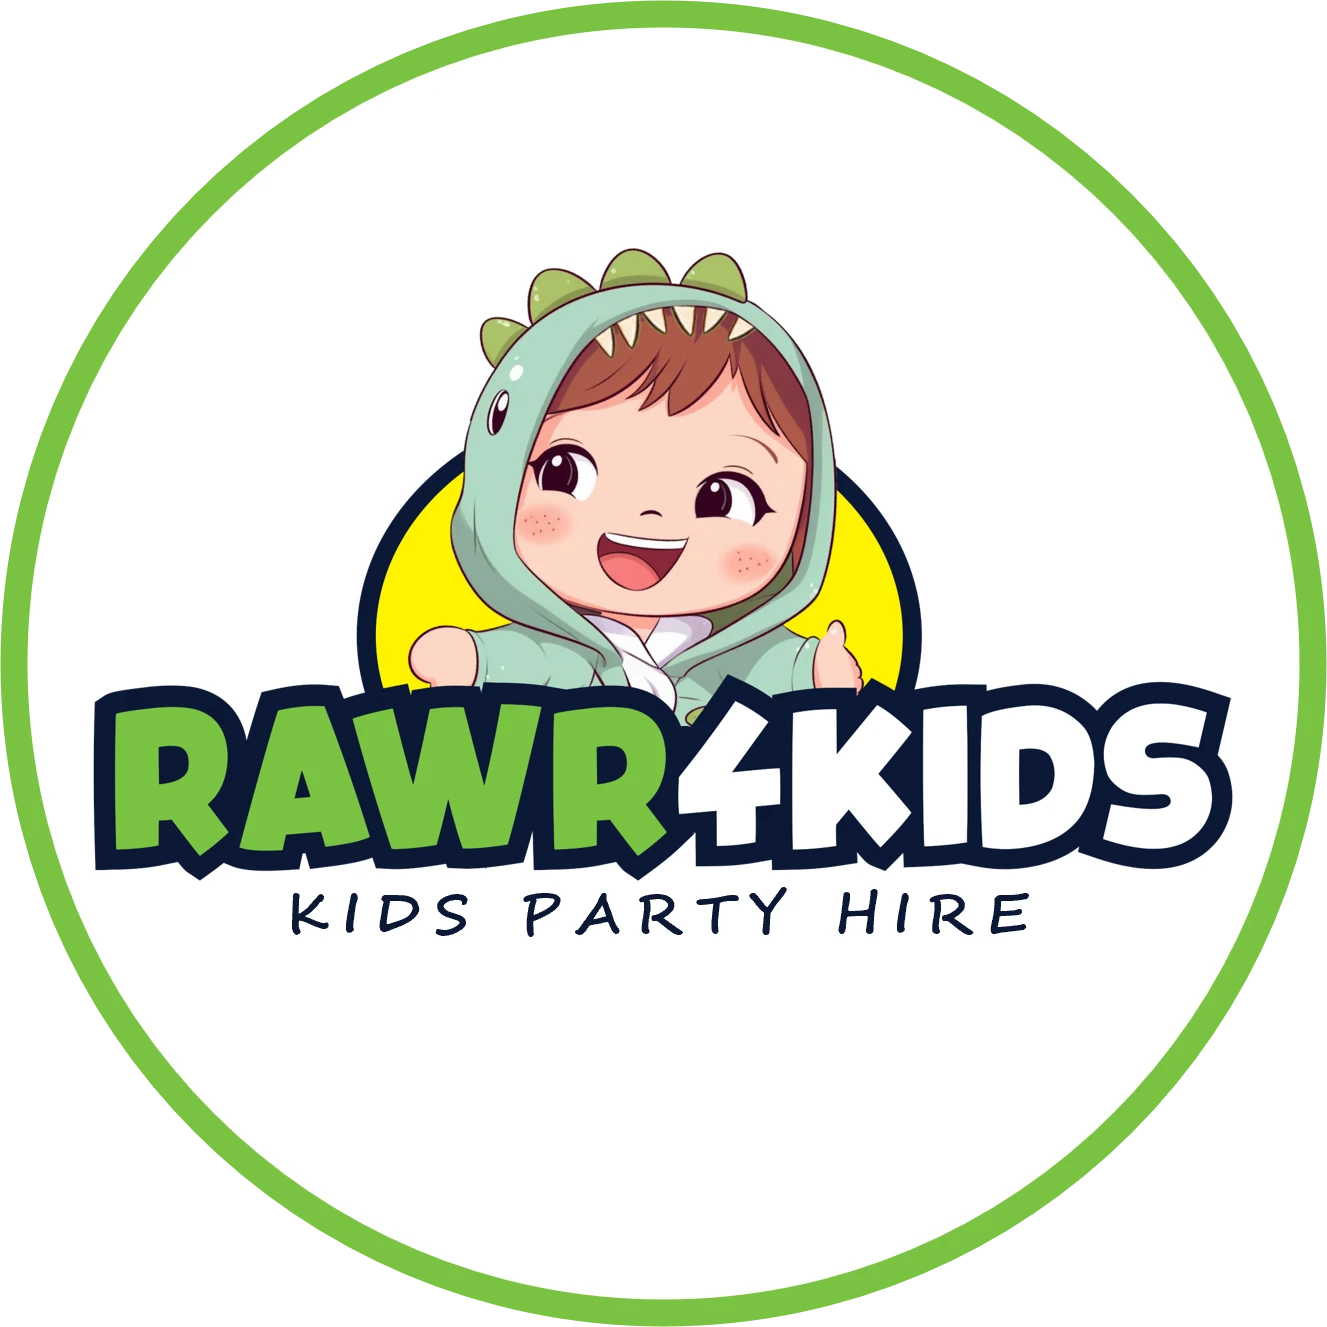 RAWR4KIDS | Kids Ride on Cars & Party Hire